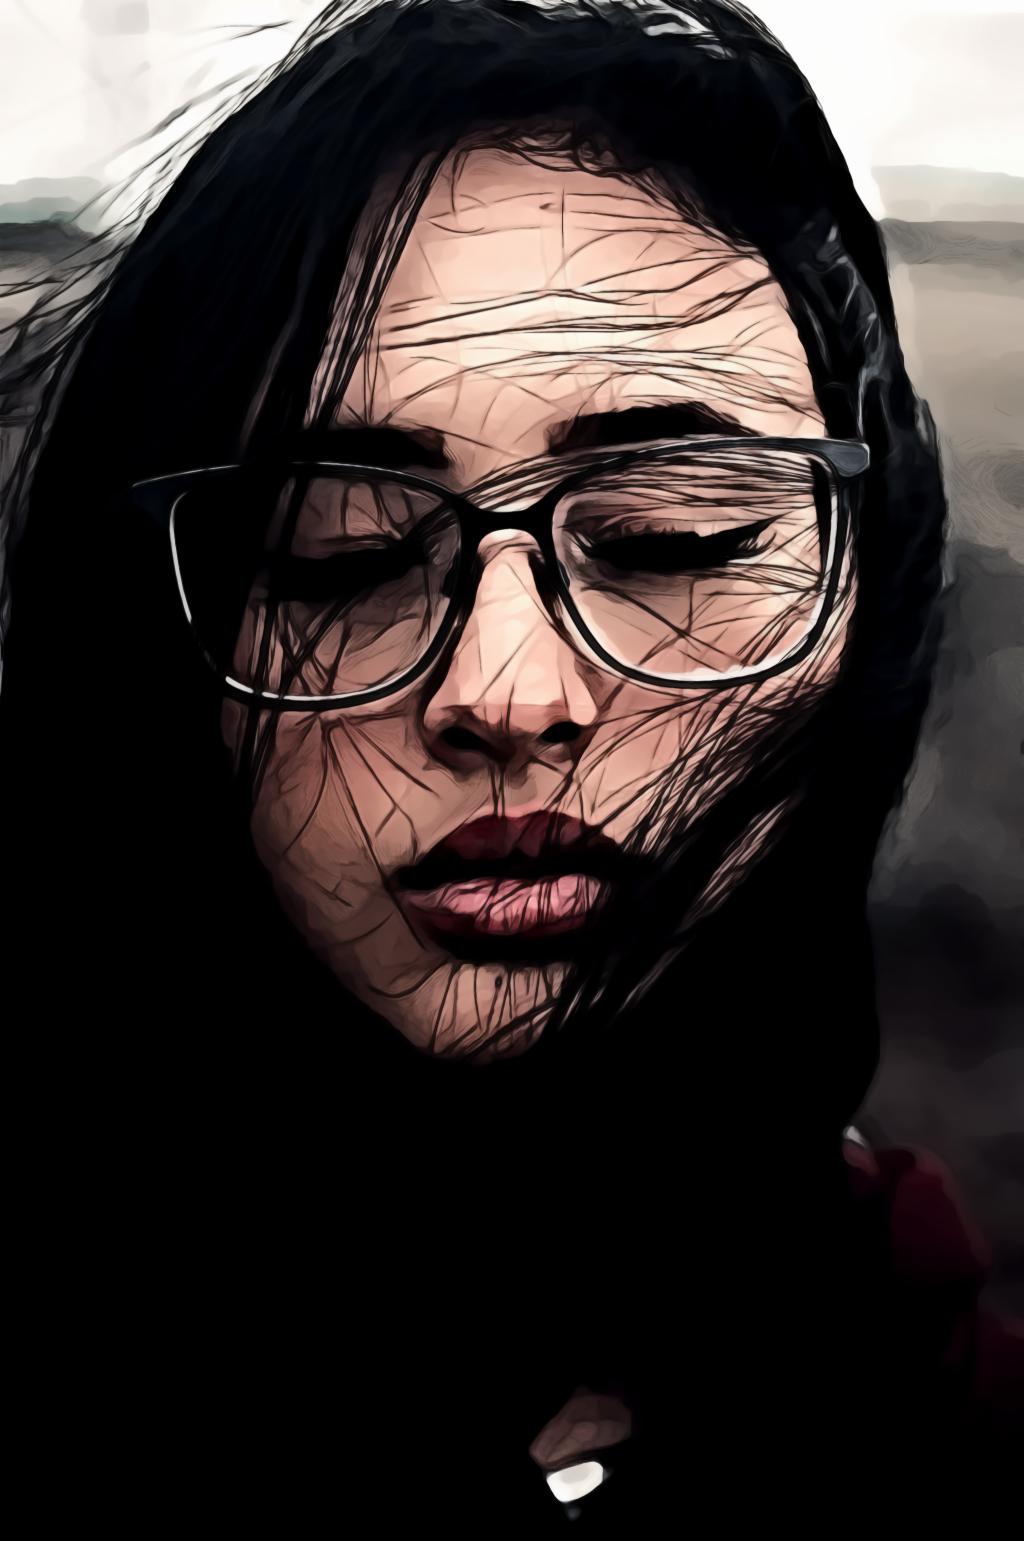 Portrait of woman in black framed eyeglasses with her eyes closed